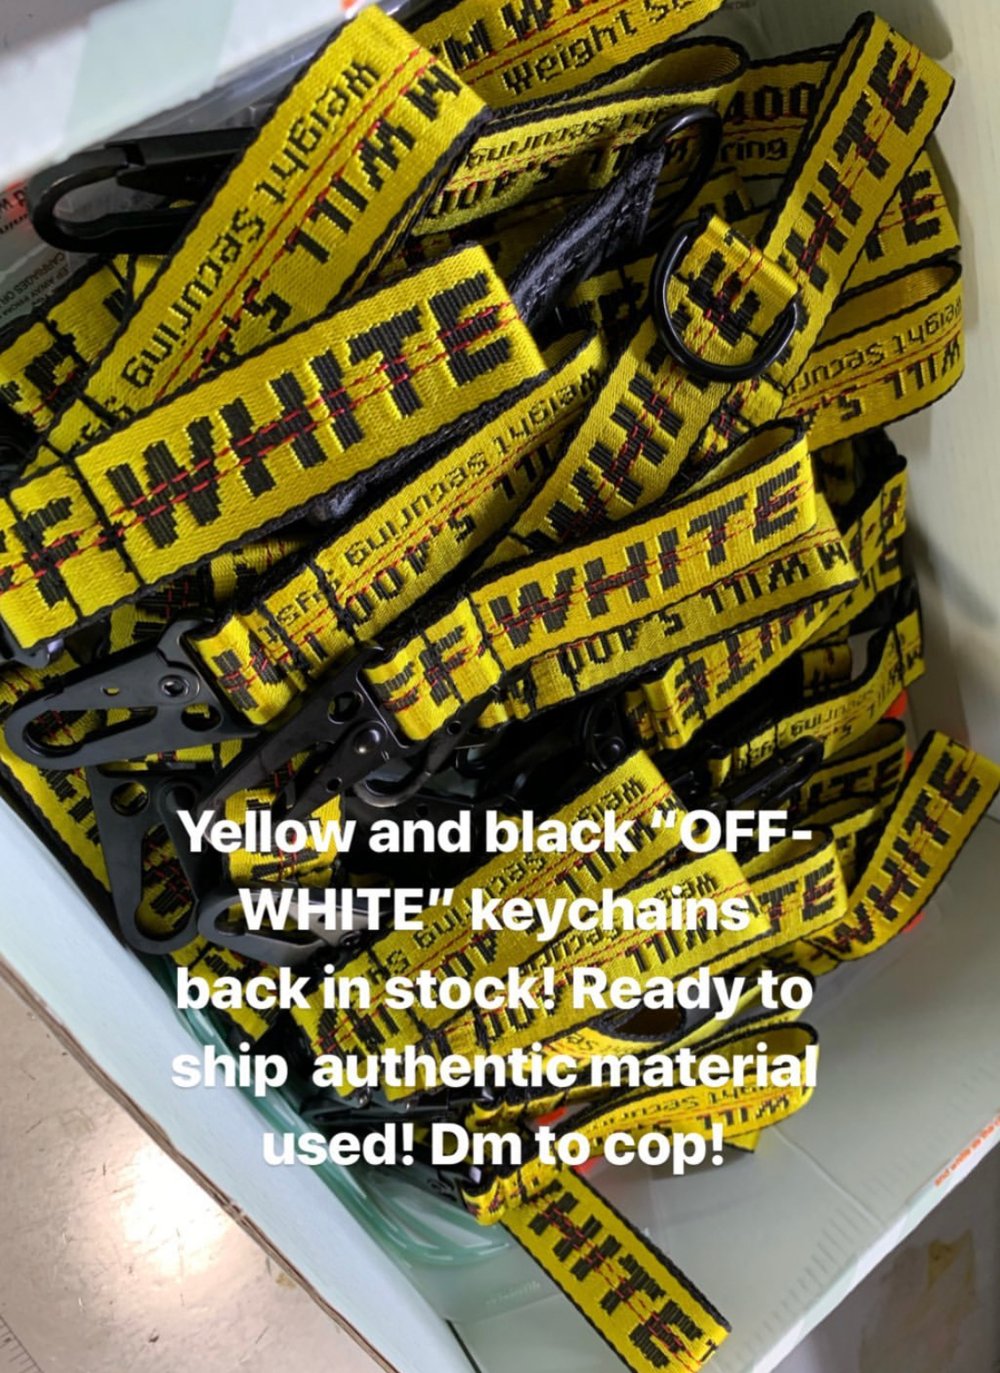 Custom “OFF-WHITE” keychain made with authentic material